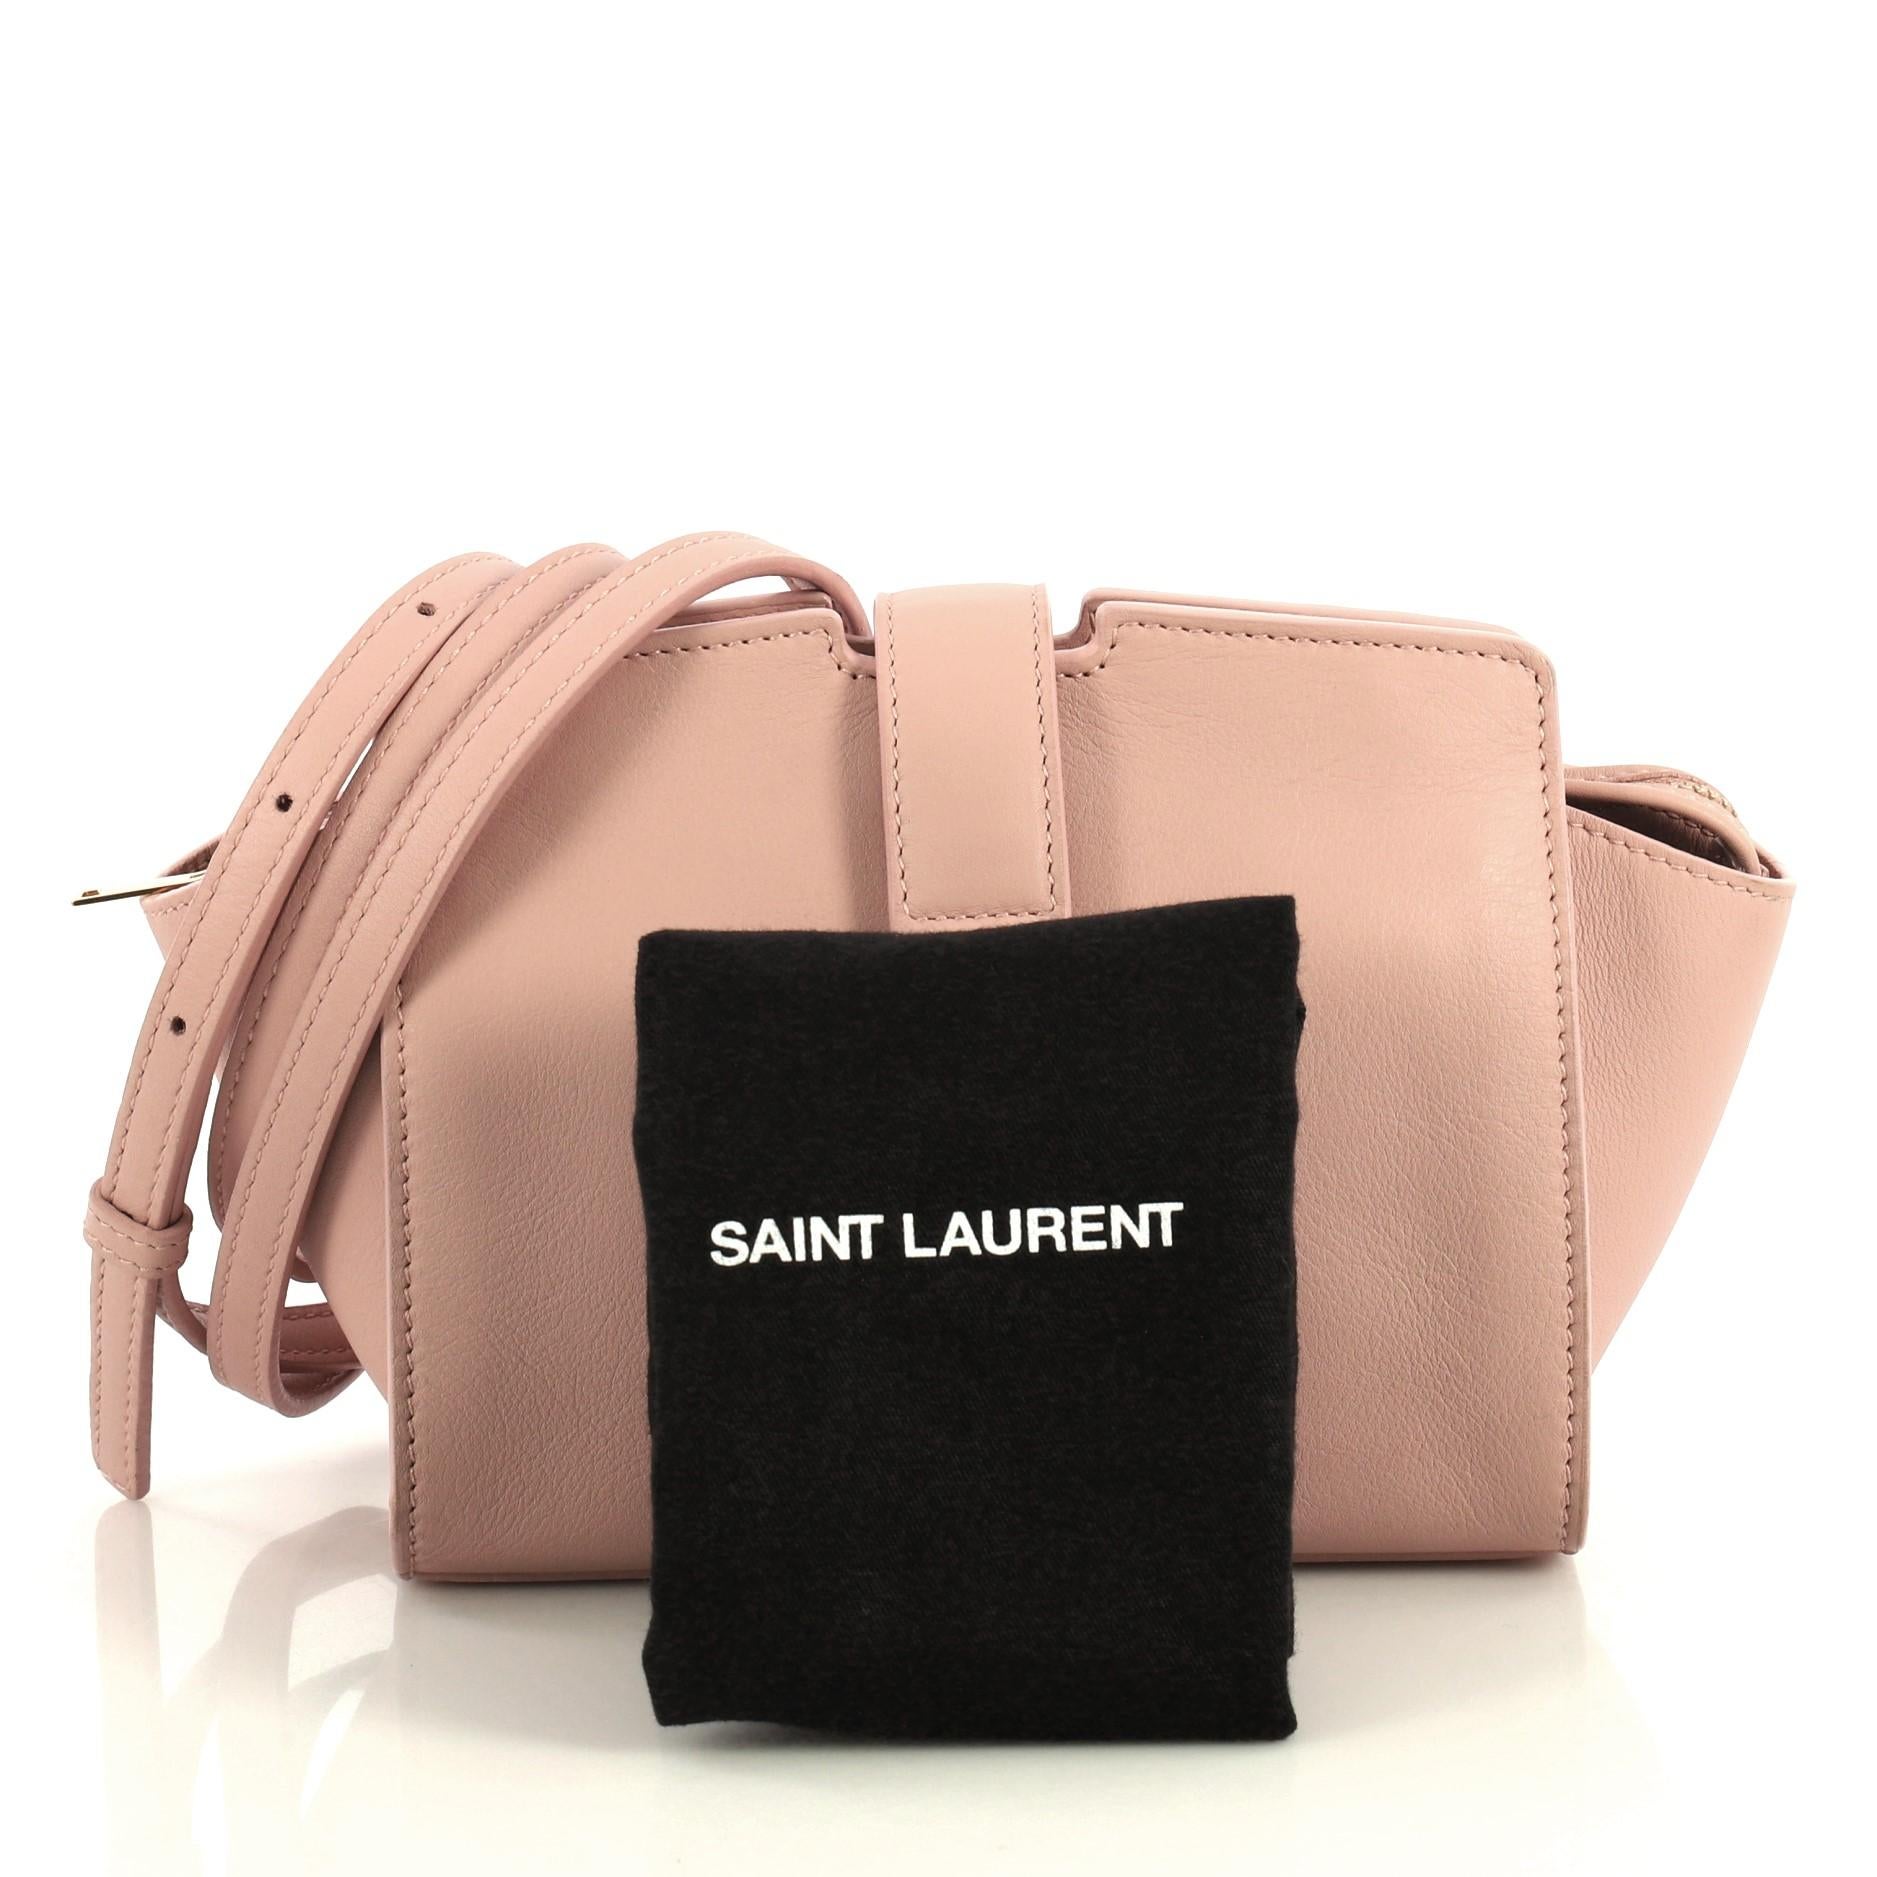 This Saint Laurent Monogram Cabas Leather Toy, crafted from pink leather, features a flat leather strap, YSL metal logo at the front, and gold-tone hardware. Its top flap magnetic snap and zip closure opens to a pink leather interior with slip